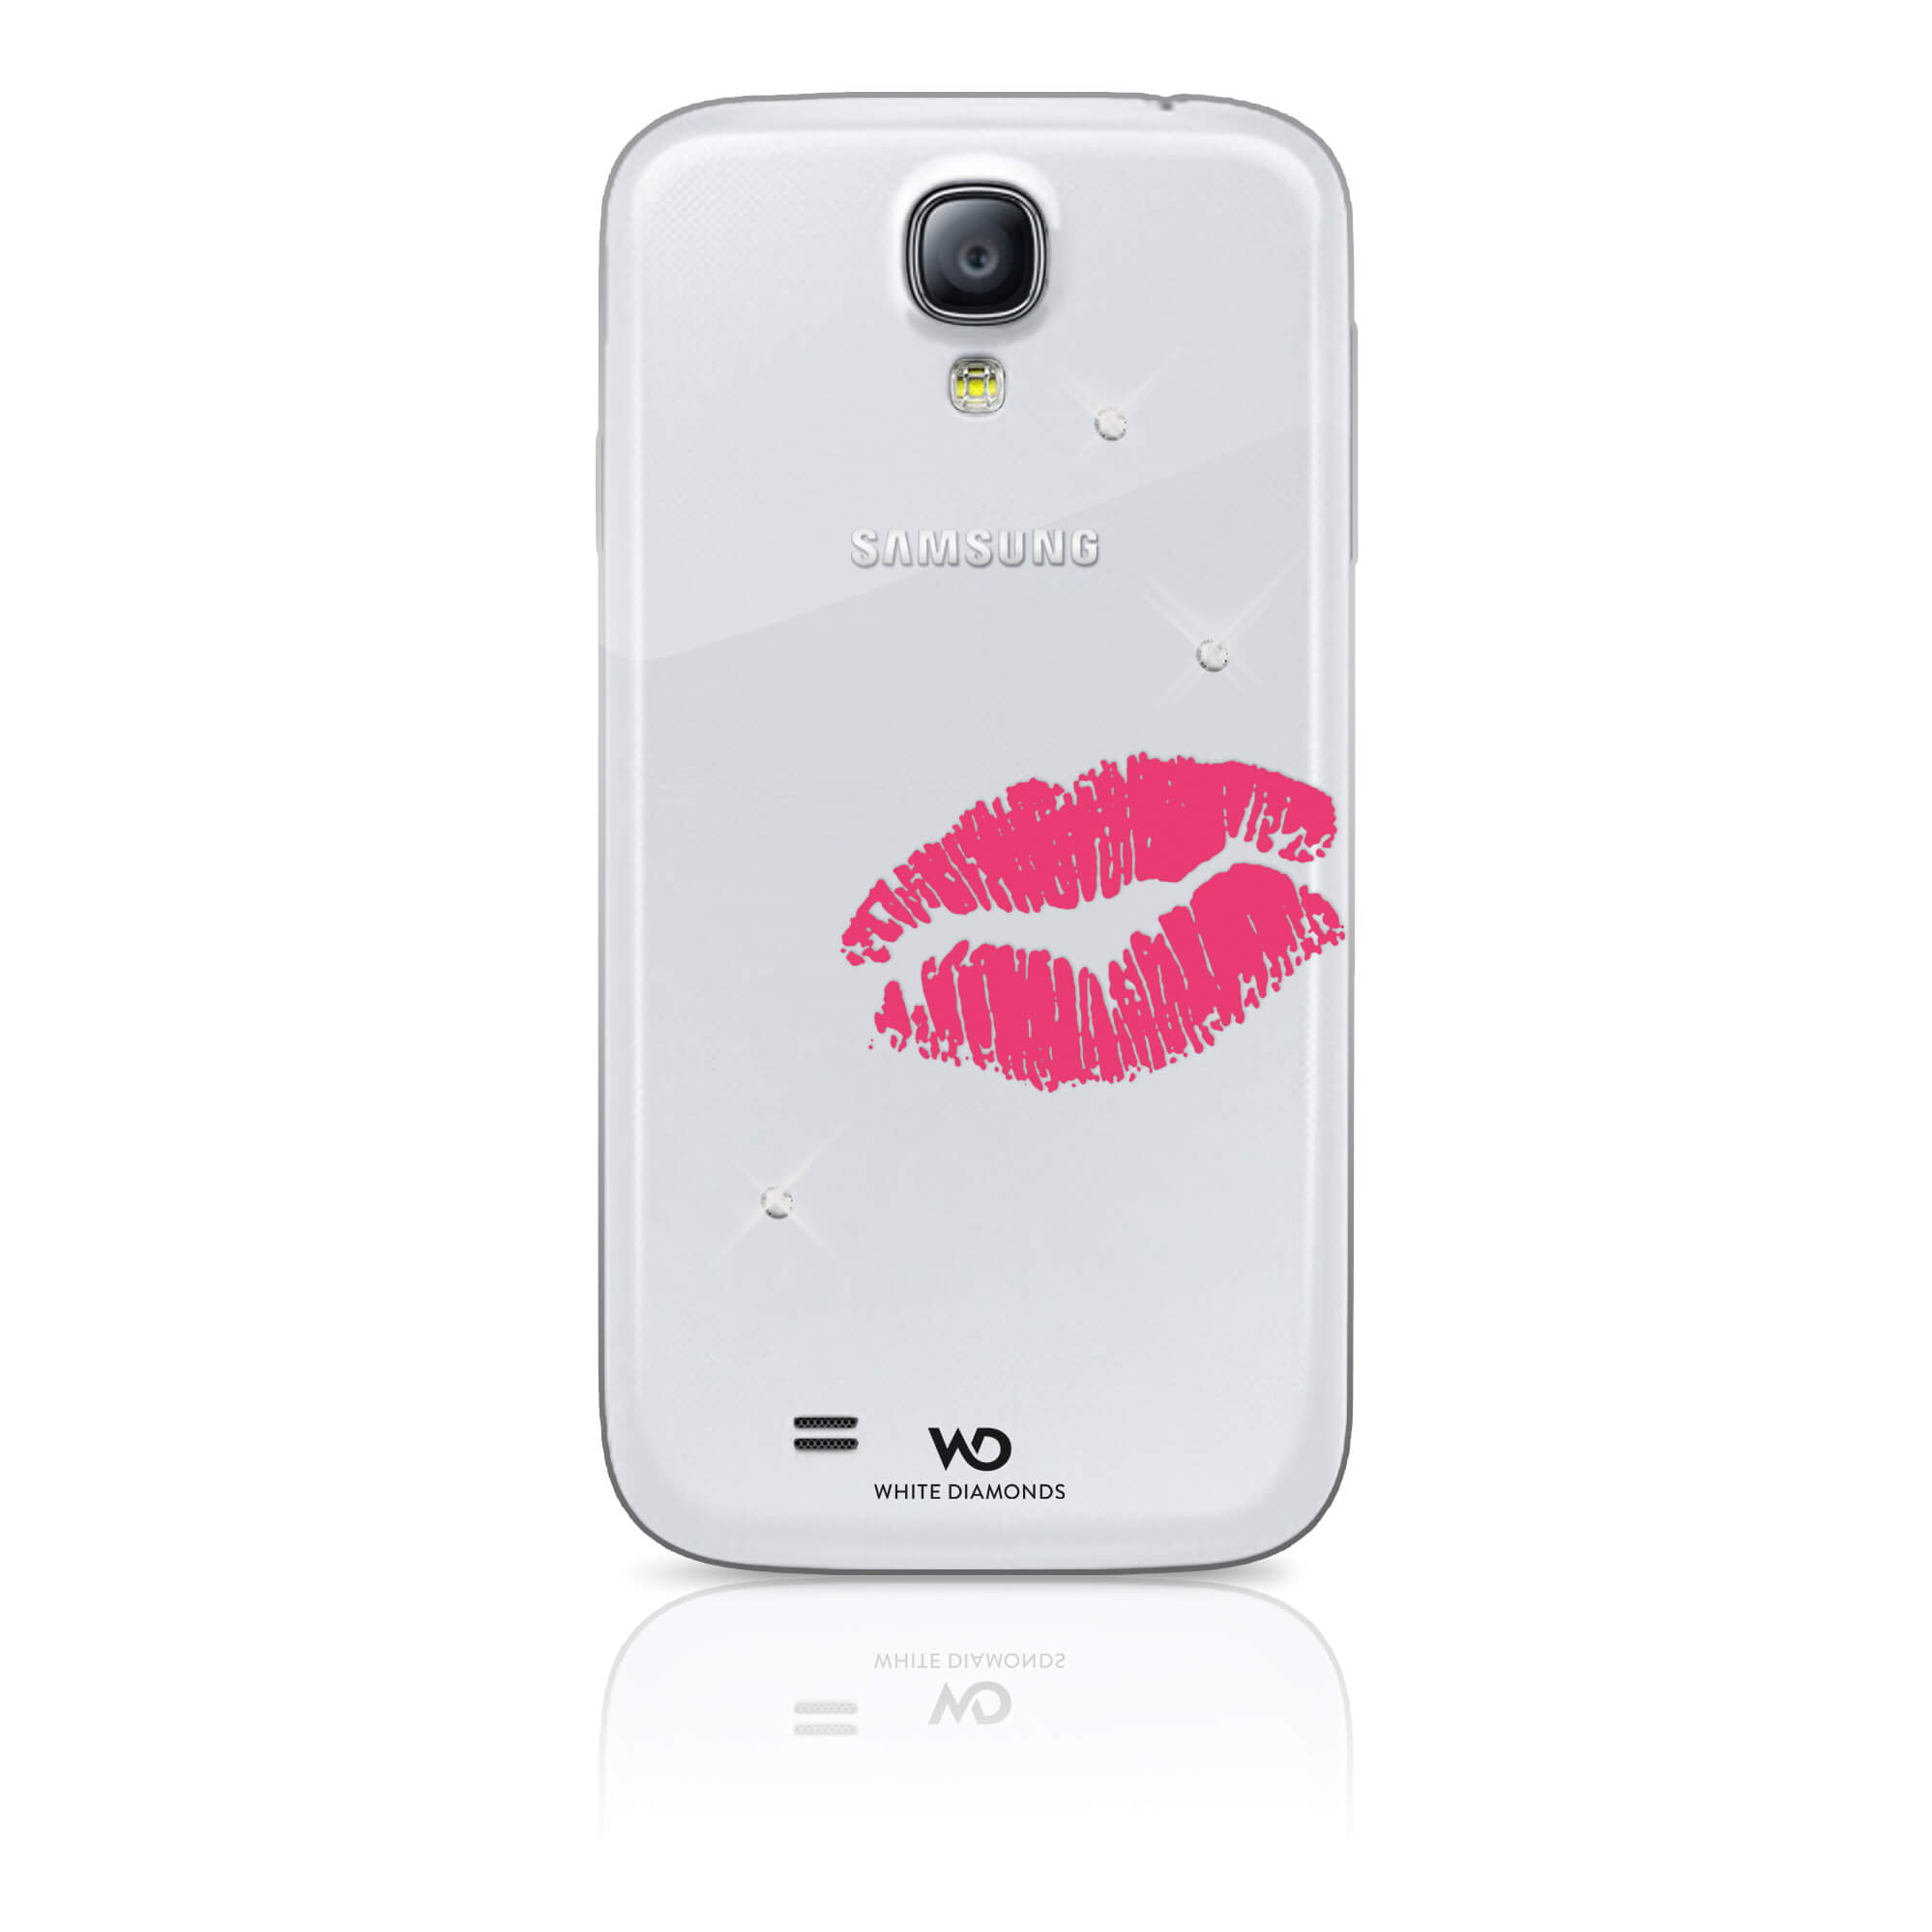 Lipstick Kiss Mobile Phone Co ver for Samsung Galaxy S 4, re